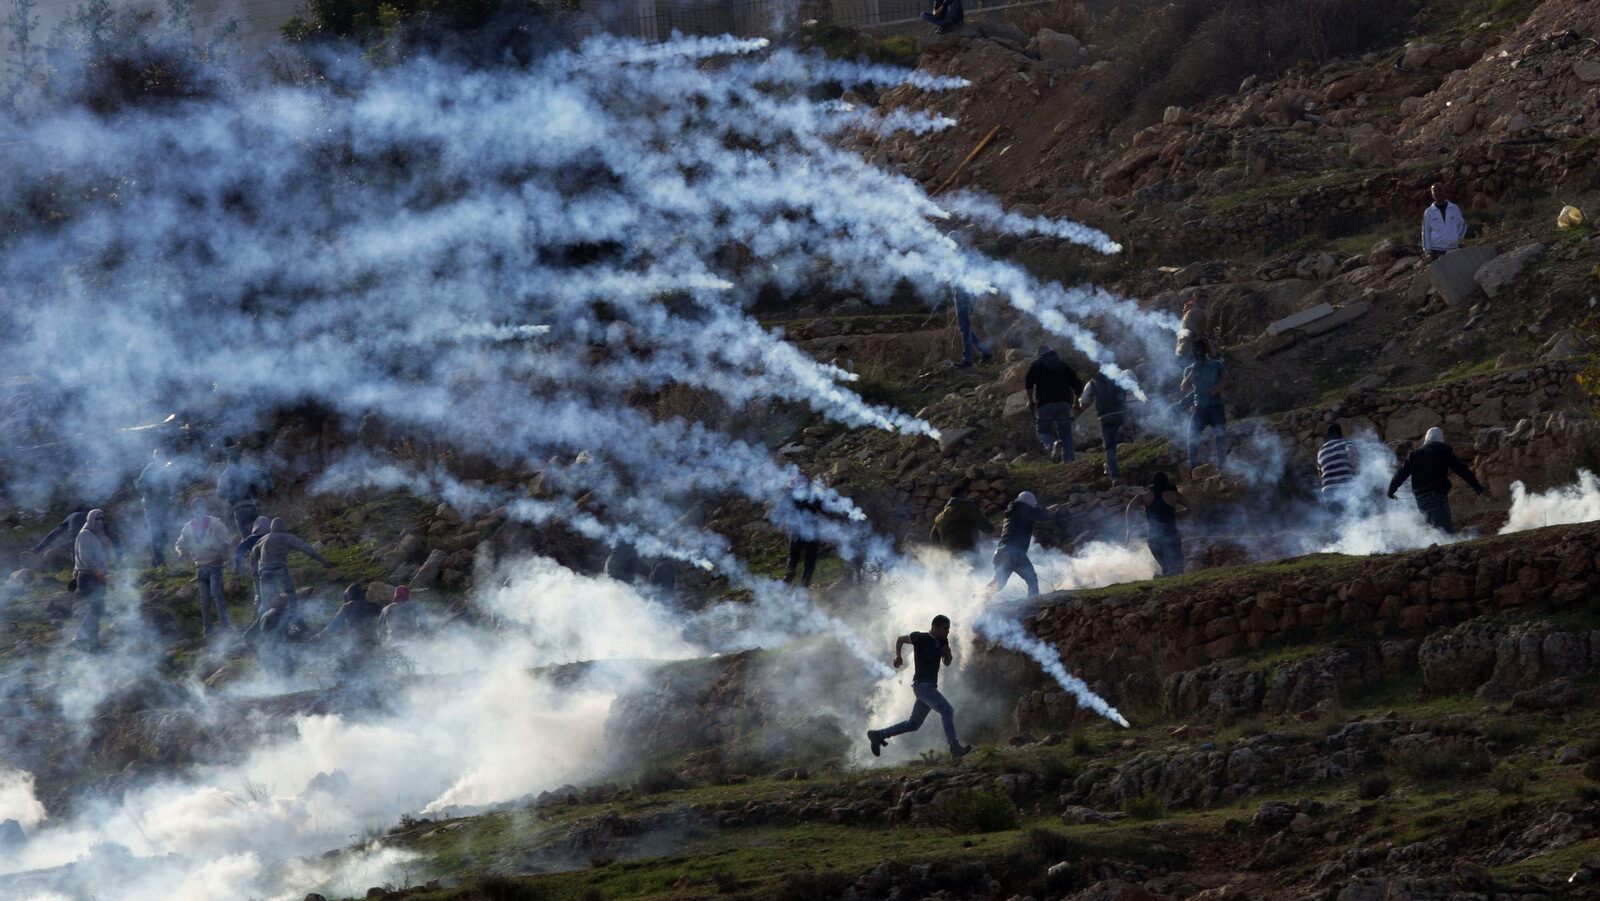 Palestinian protesters run from tear gas fired by Israeli troops during a protest of outside Ofer security prison in the occupied West Bank city of Ramallah. (AP Photo/Majdi Mohammed)